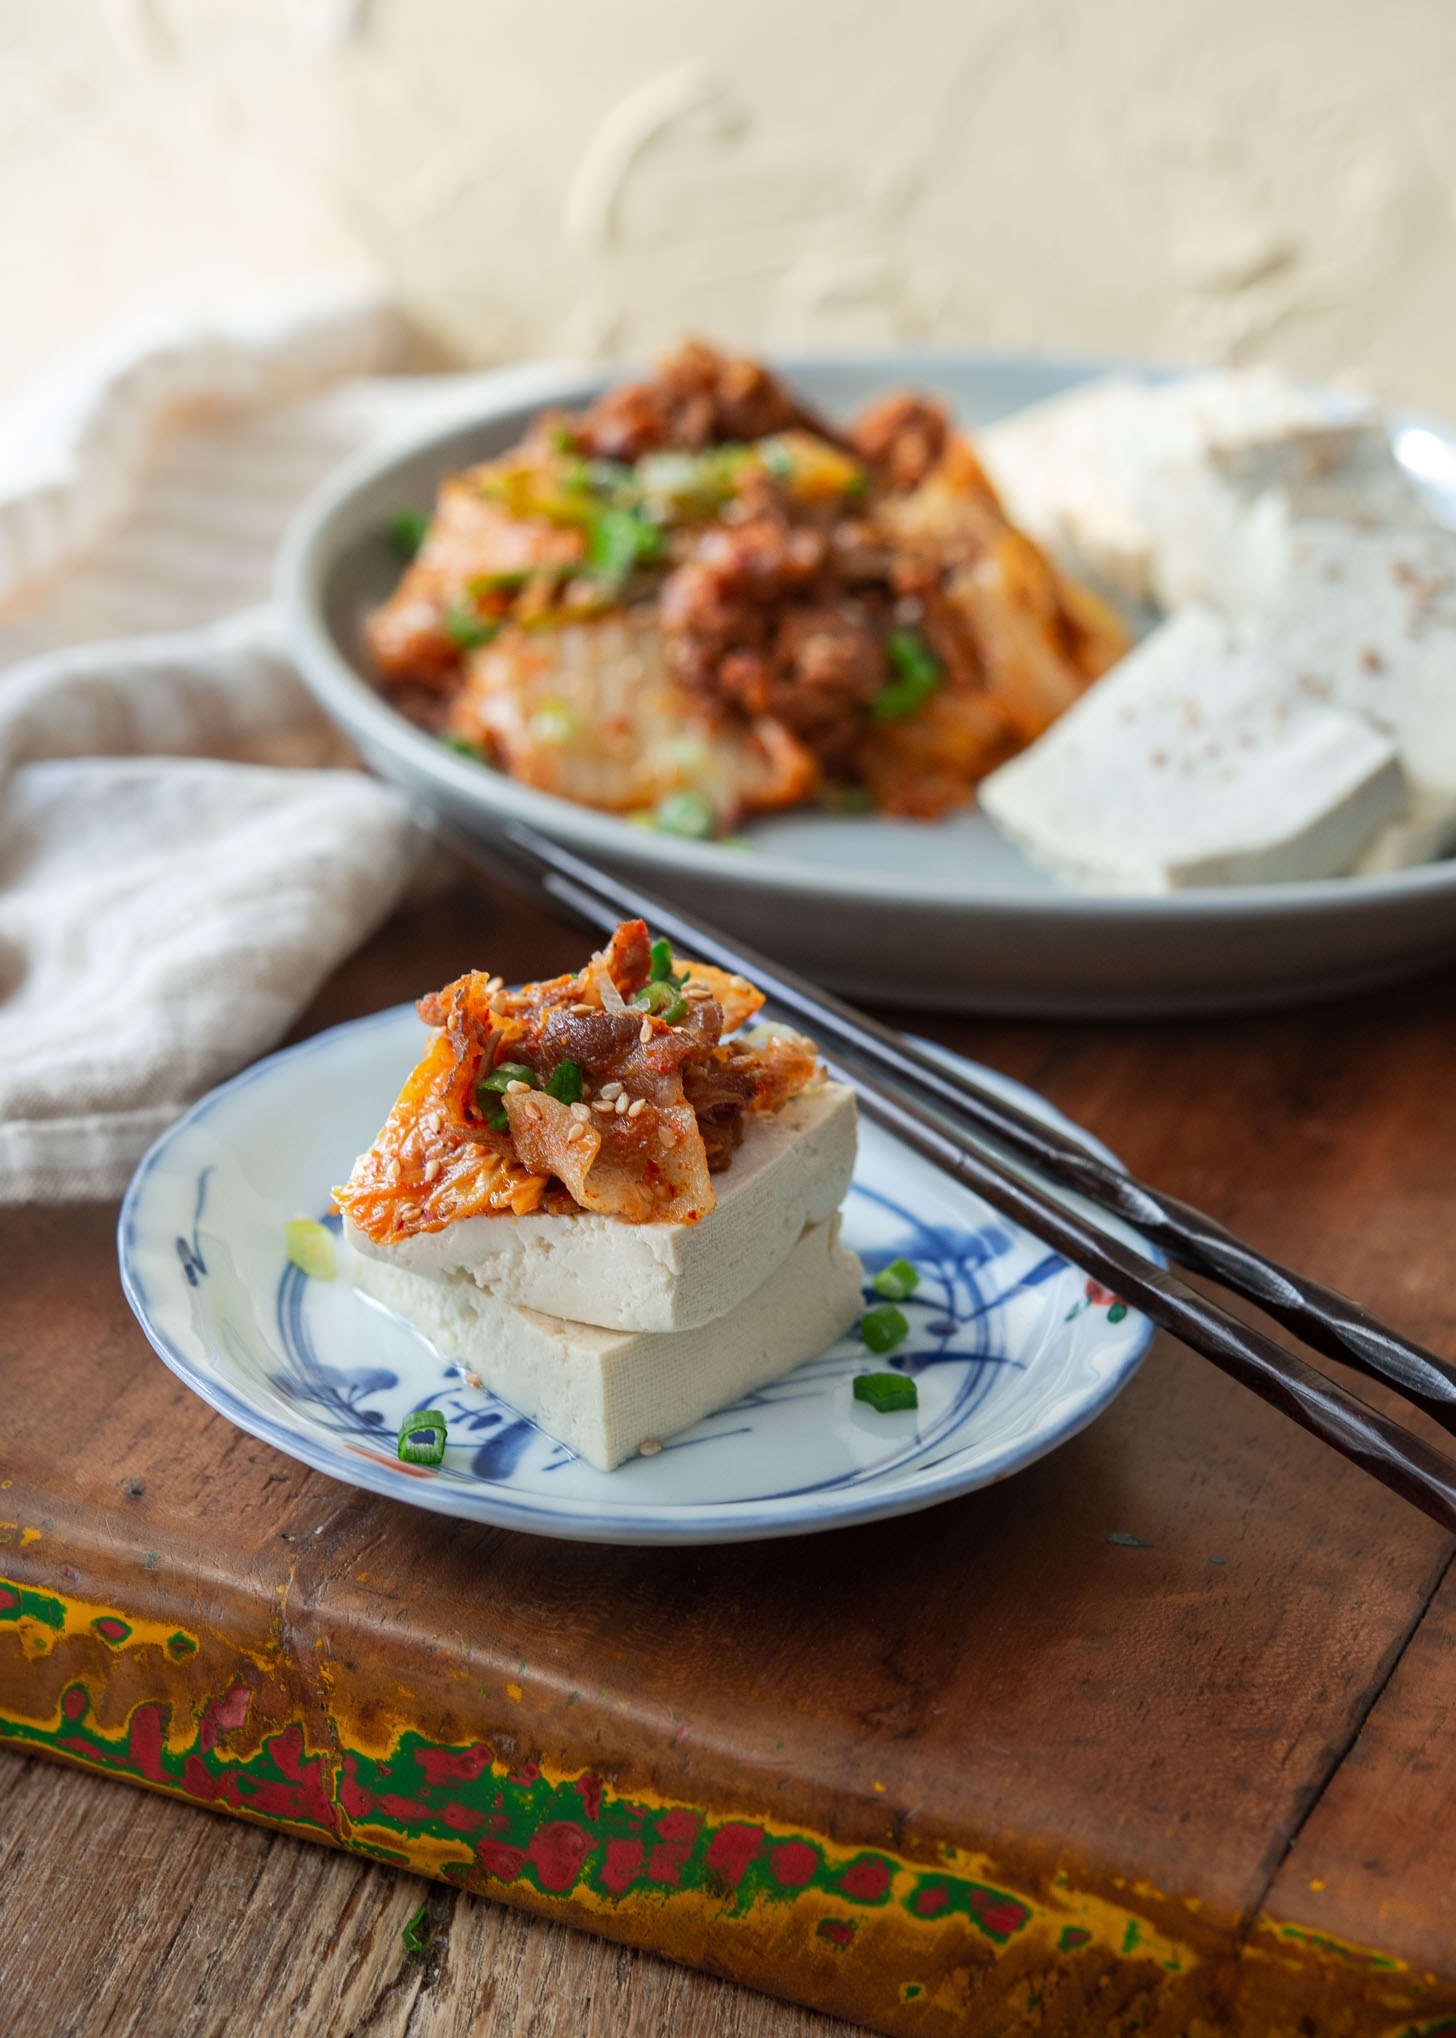 Kimchi and pork stir-fry is topped over a tofu slice on a small plate.